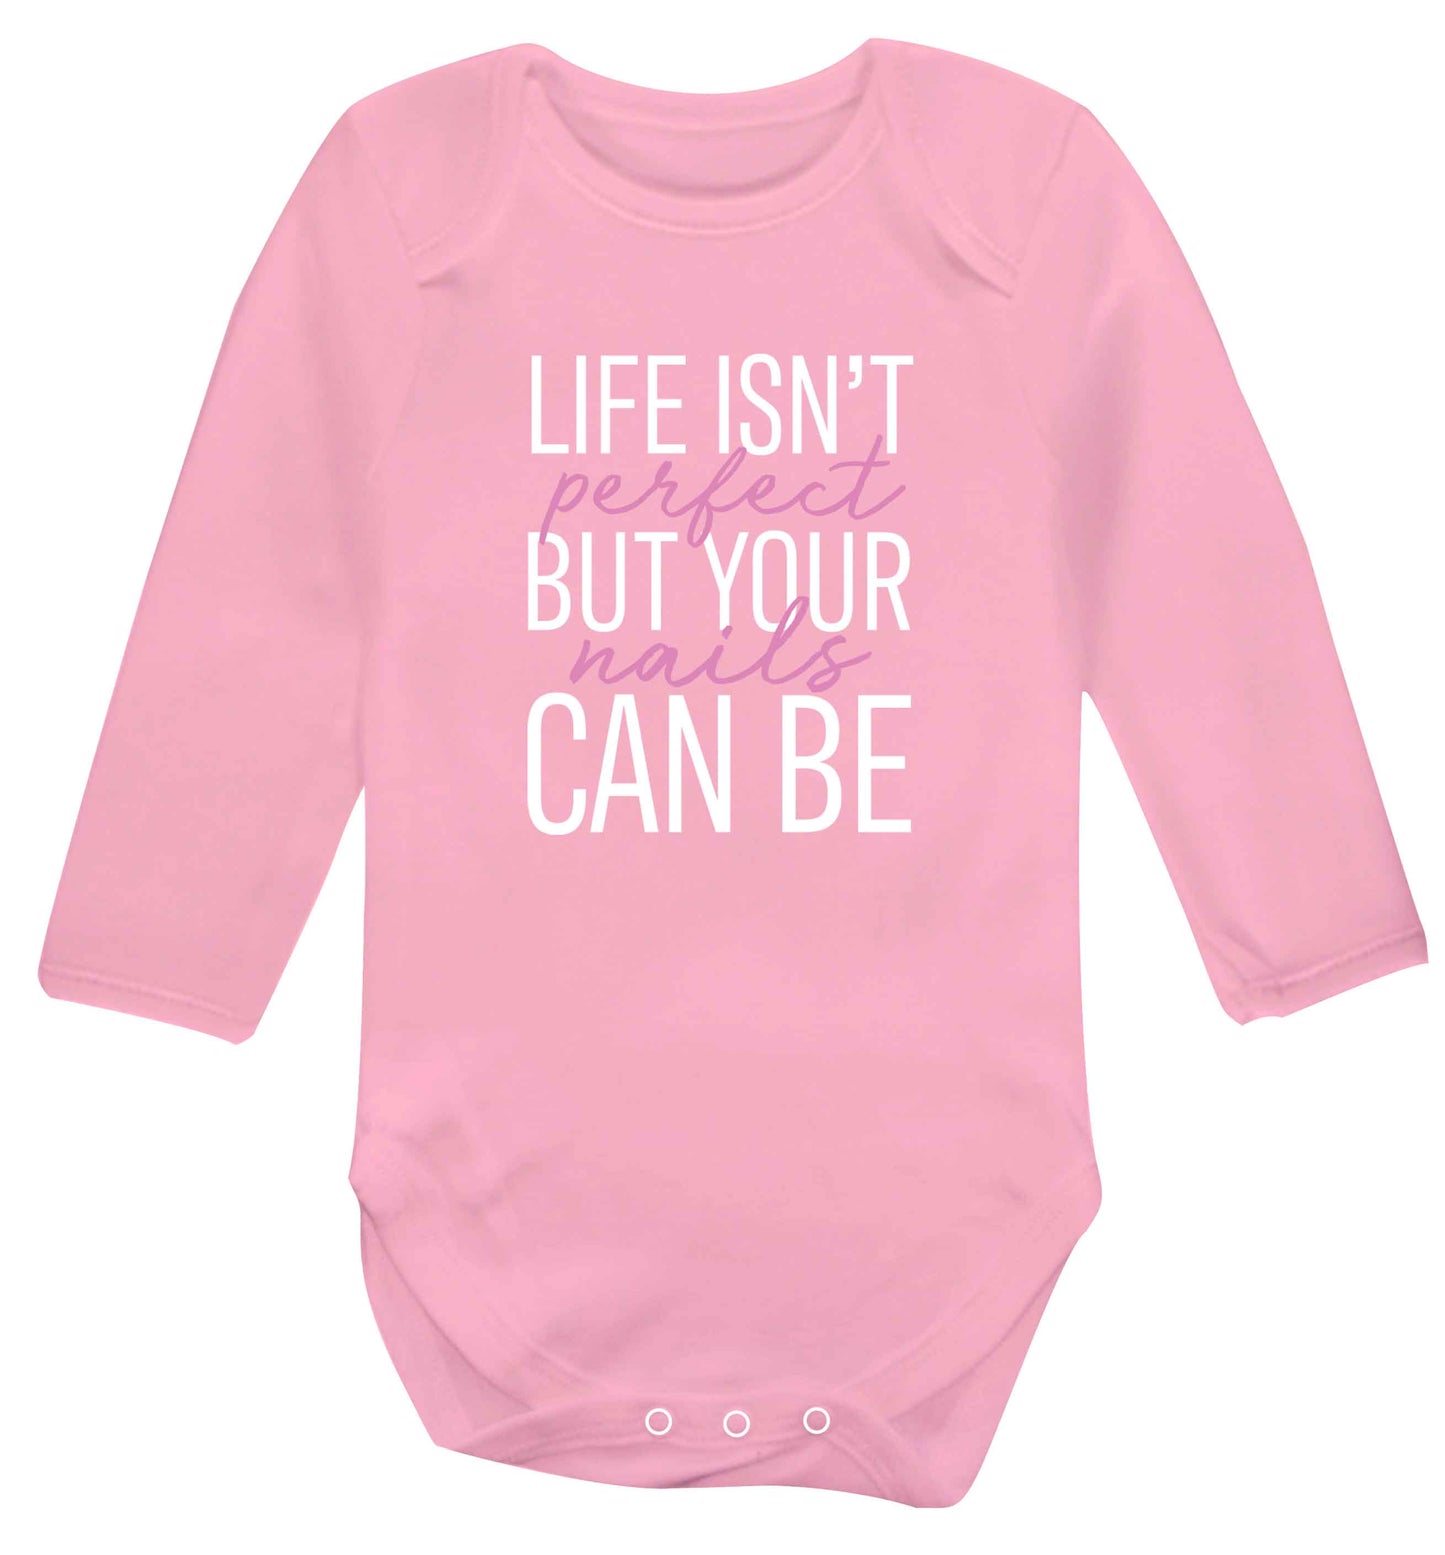 Life isn't perfect but your nails can be baby vest long sleeved pale pink 6-12 months